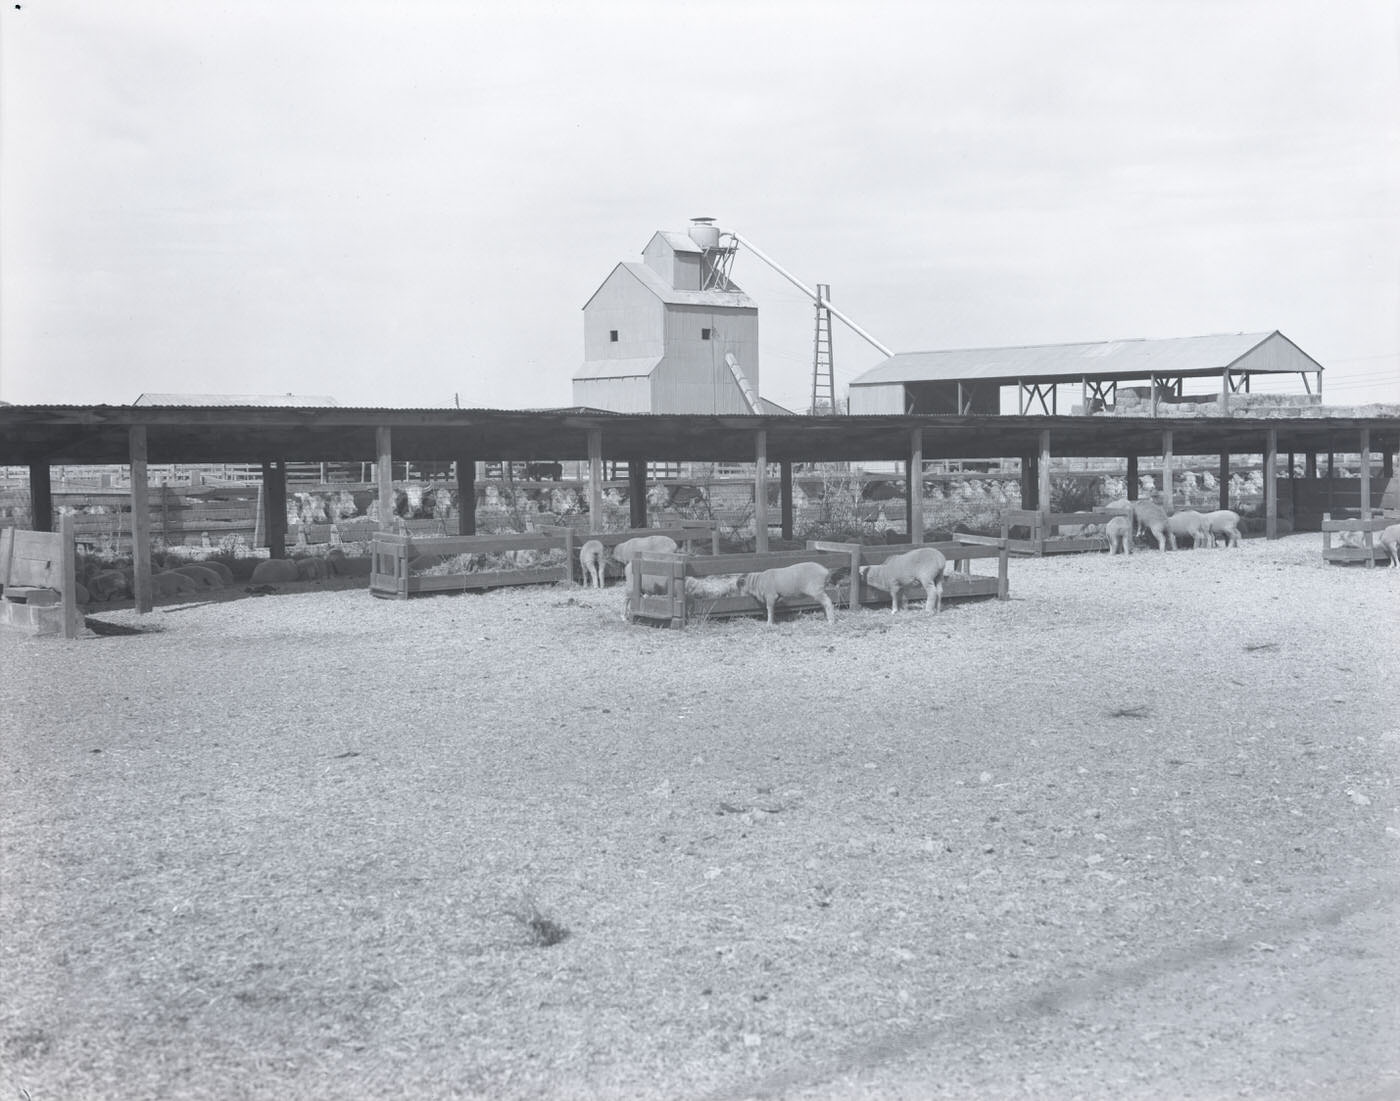 Hurley Meat Co. Cattle Lot, 1944